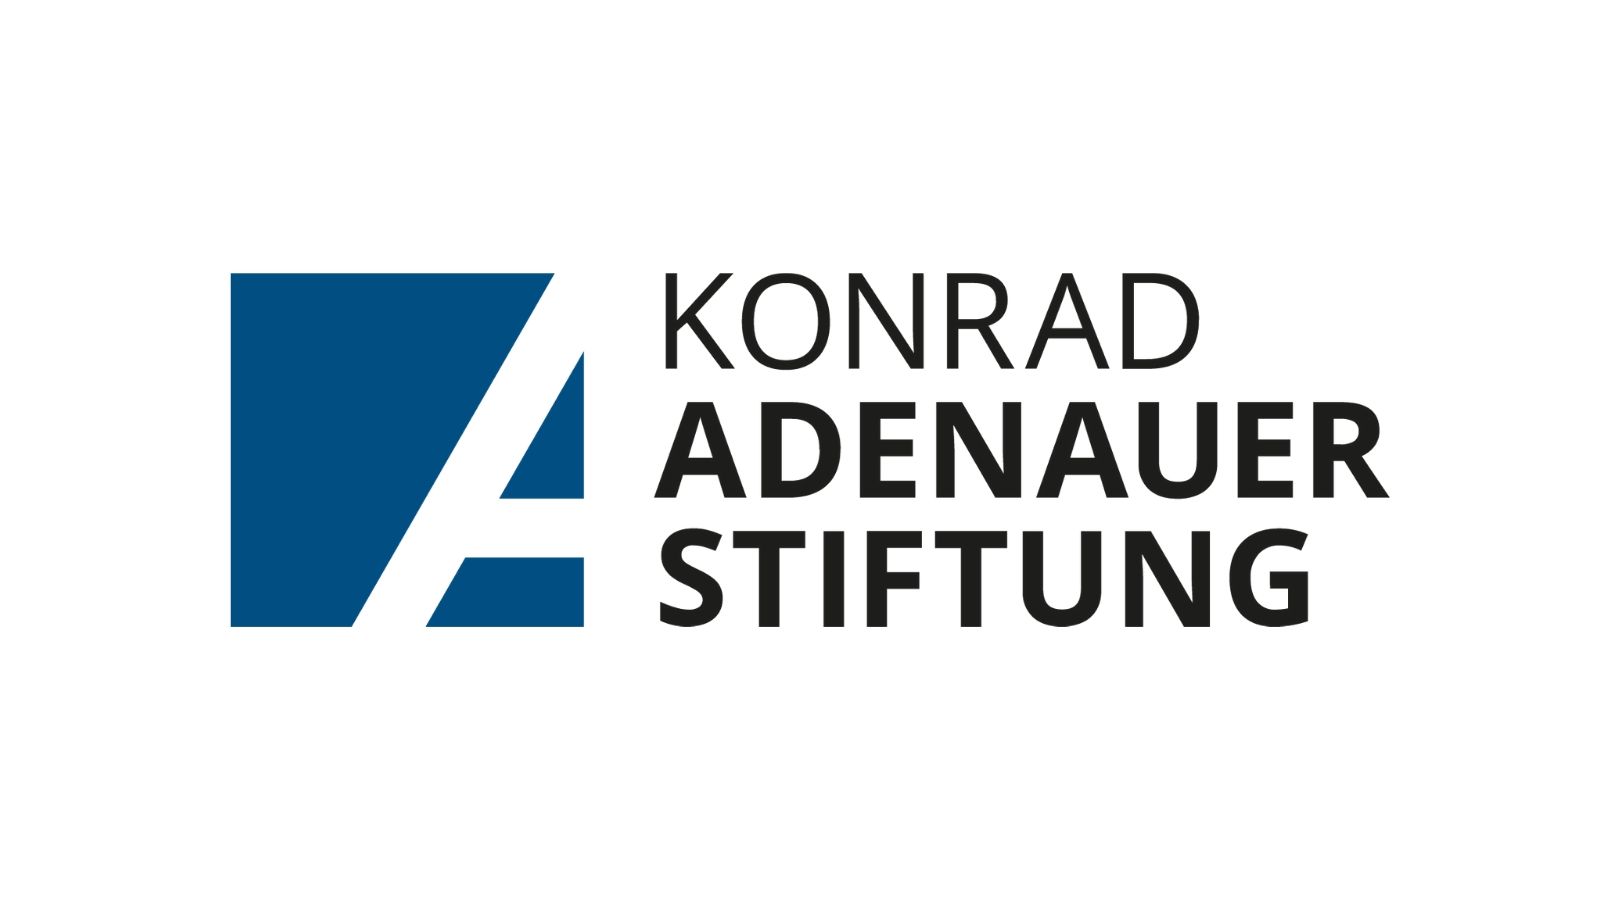 Konrad-Adenauer-Stiftung Scholarship Program 2020 for International Students to study/research in Germany